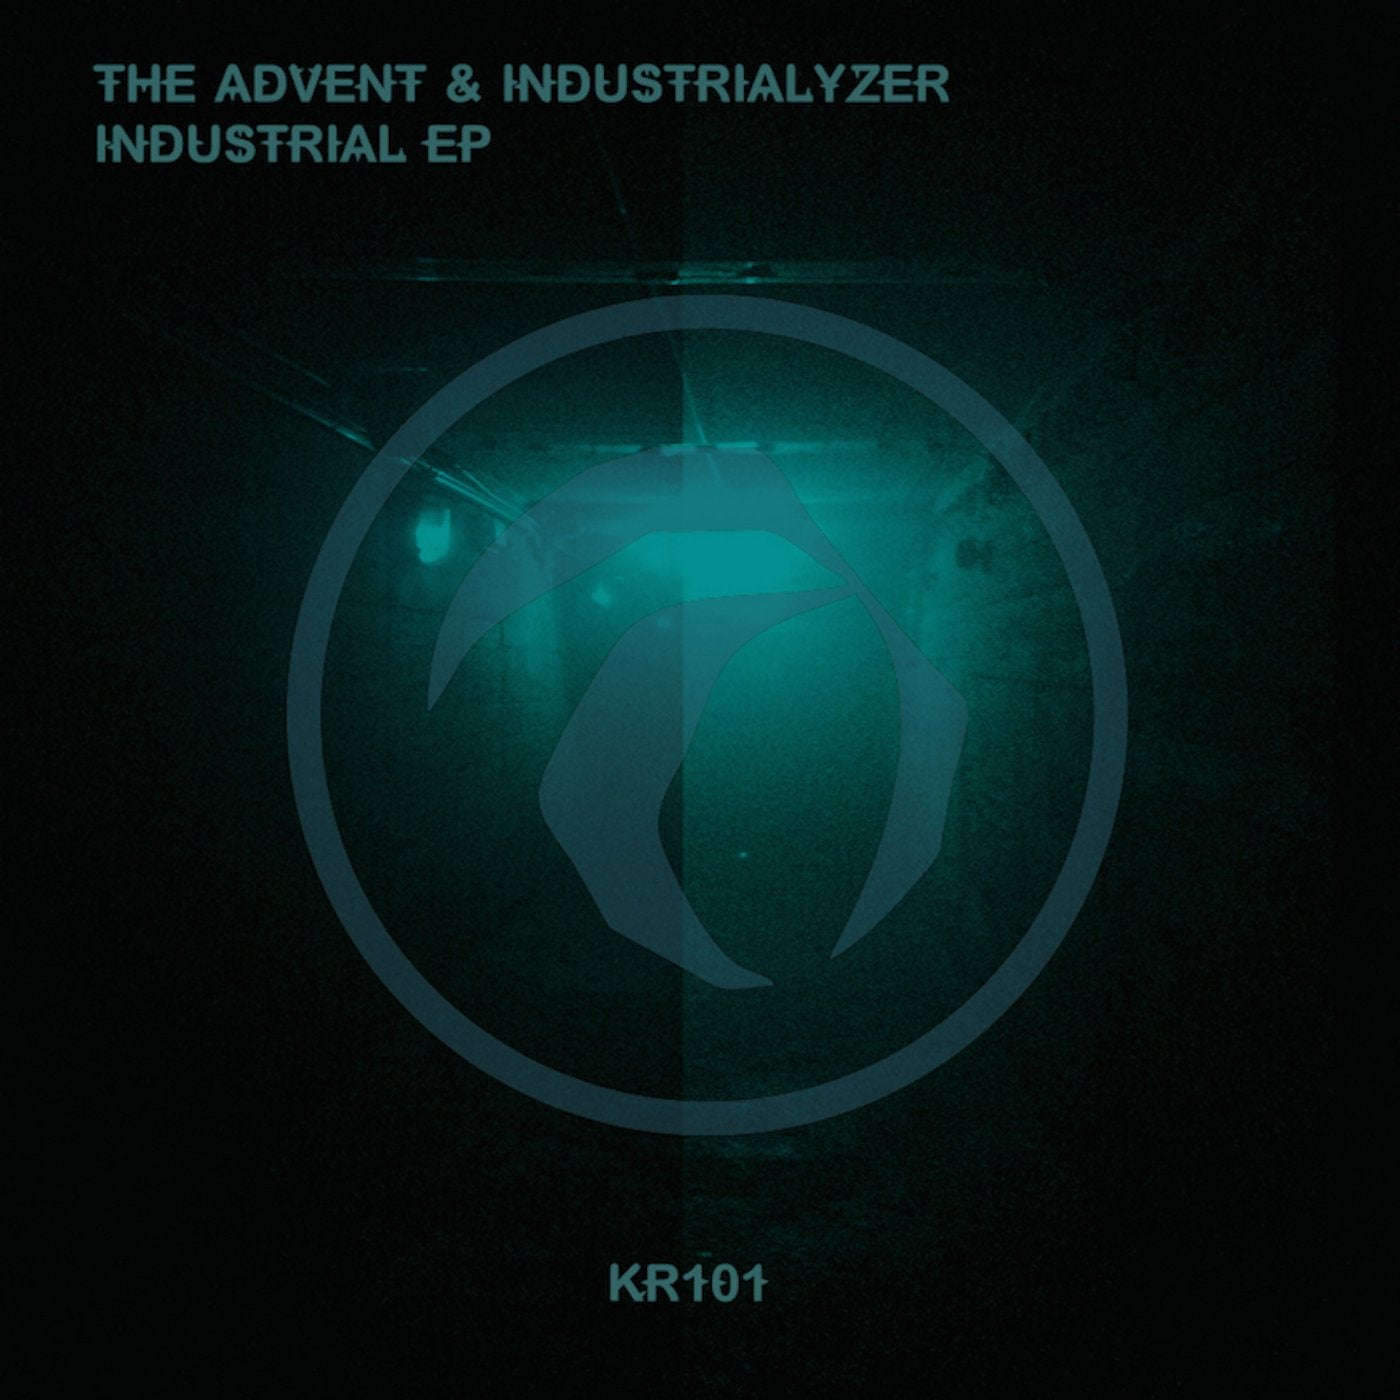 Industrial EP